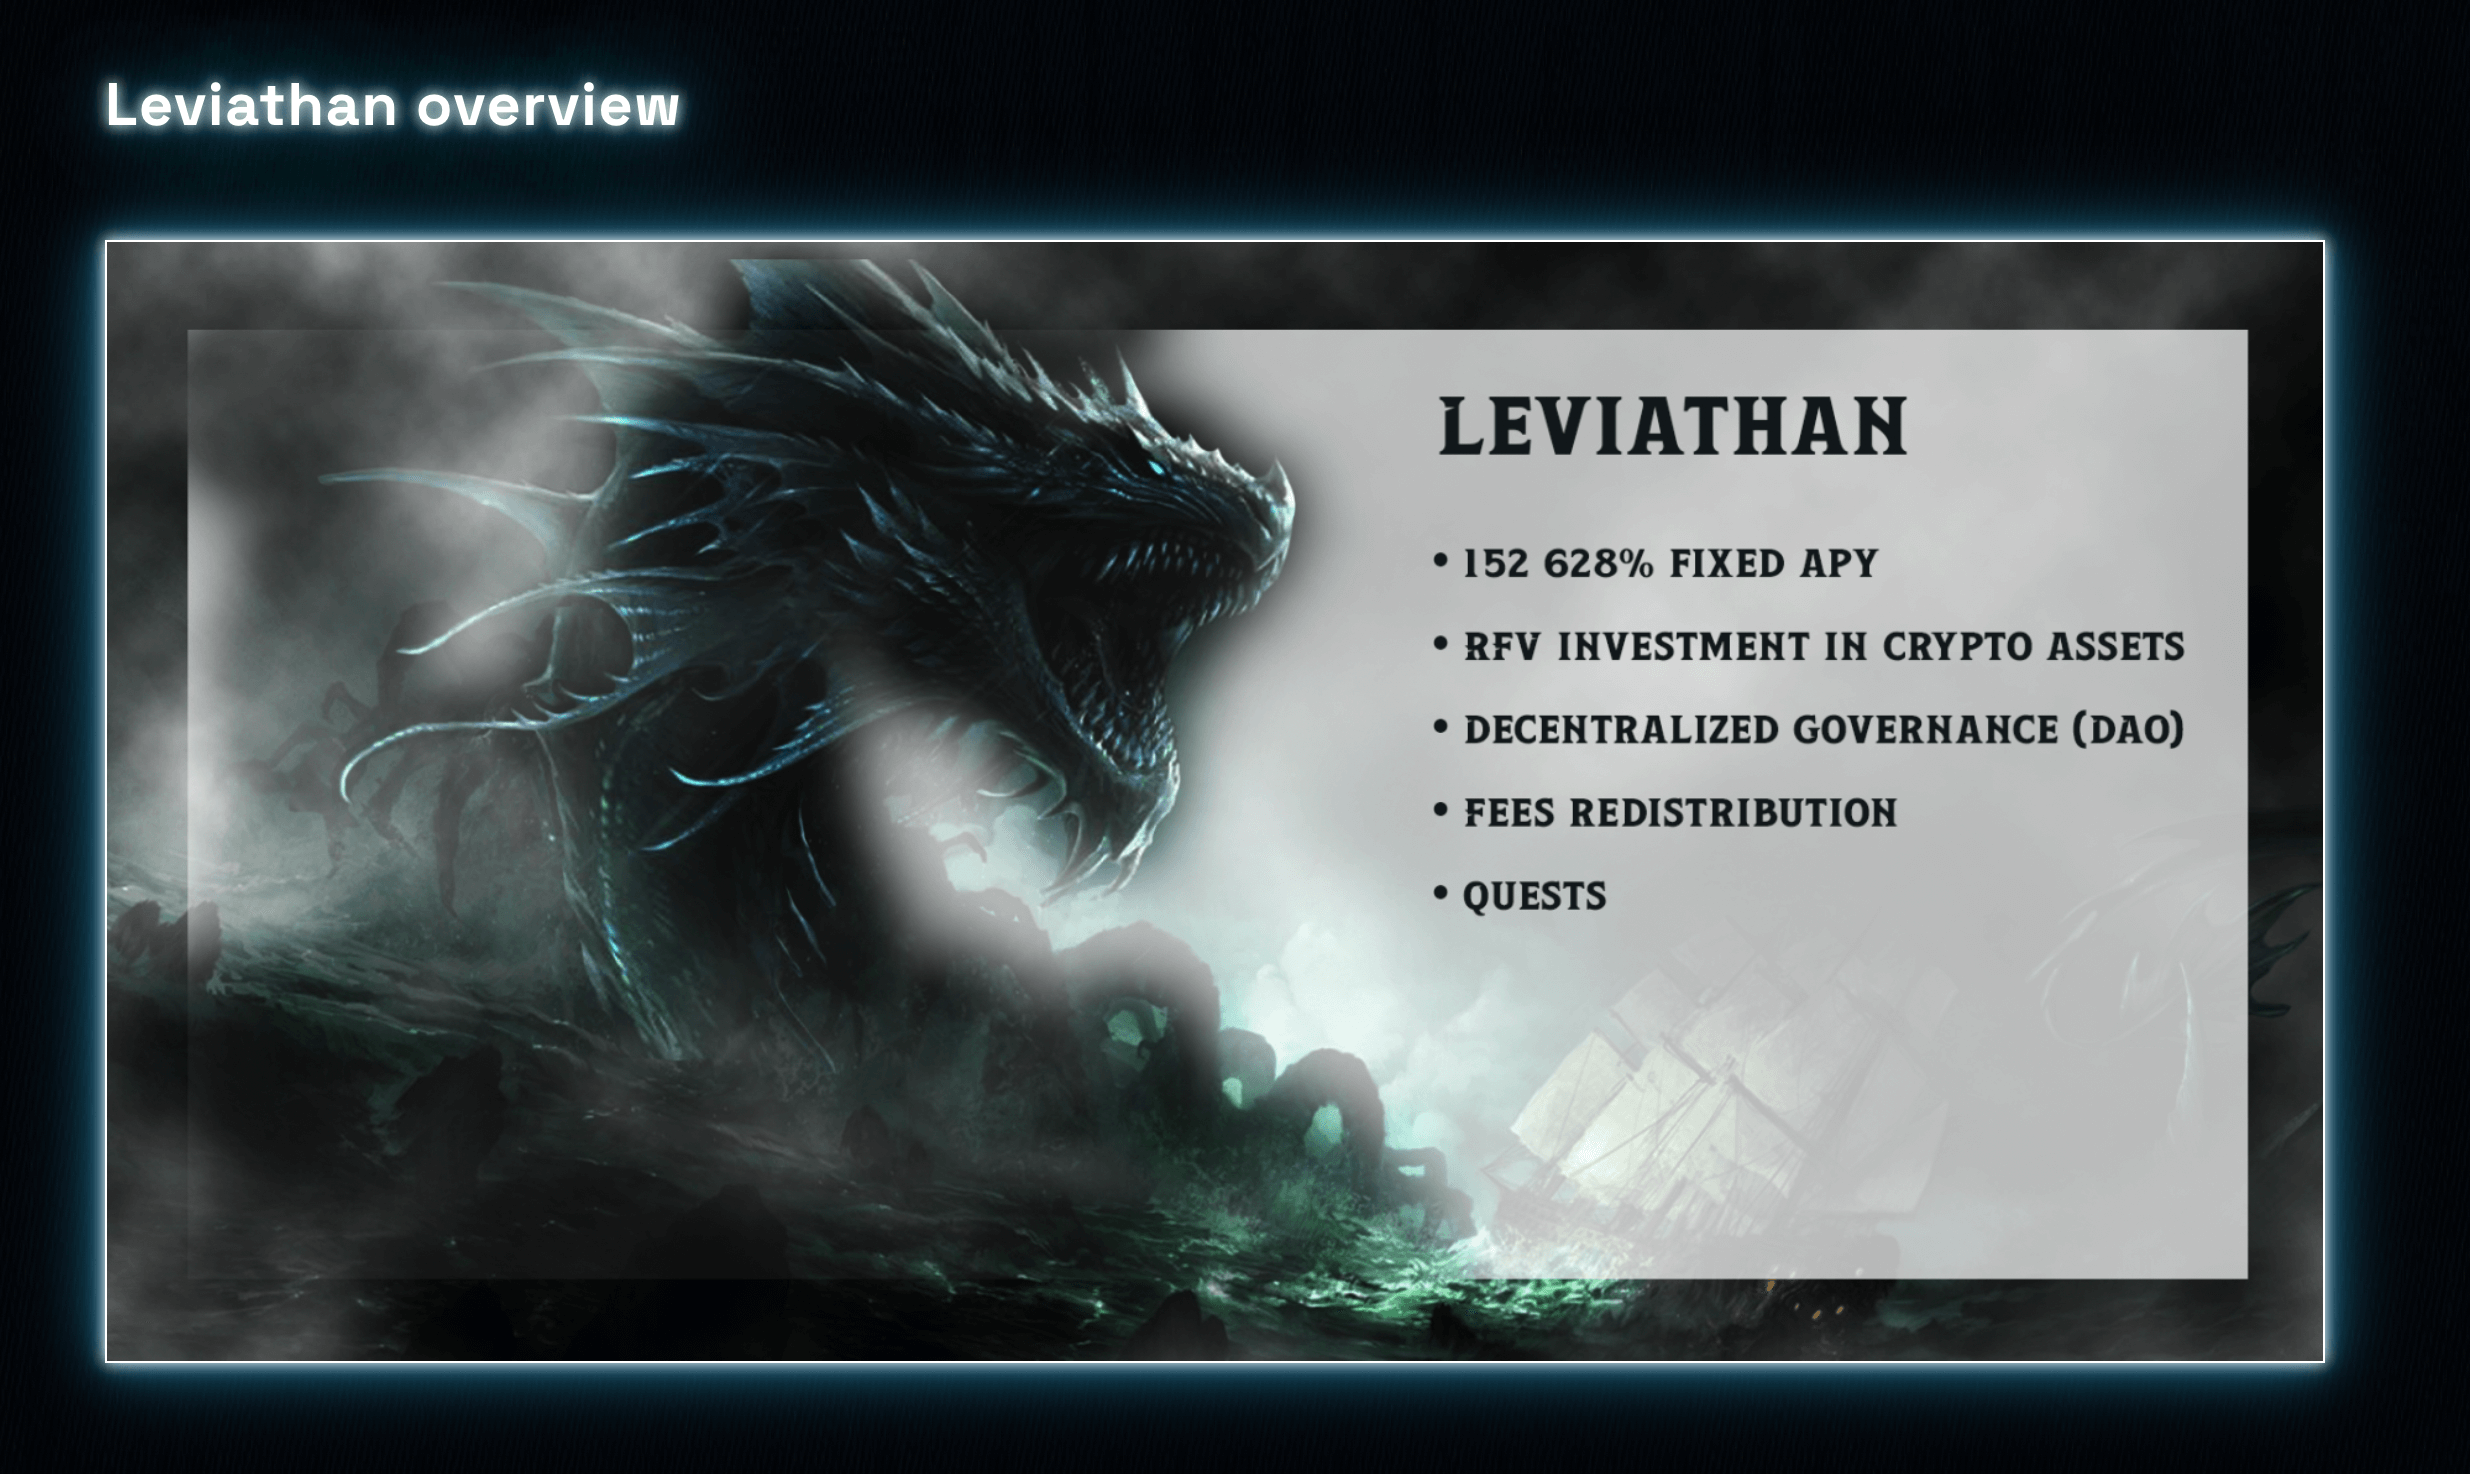 Leviathan cover